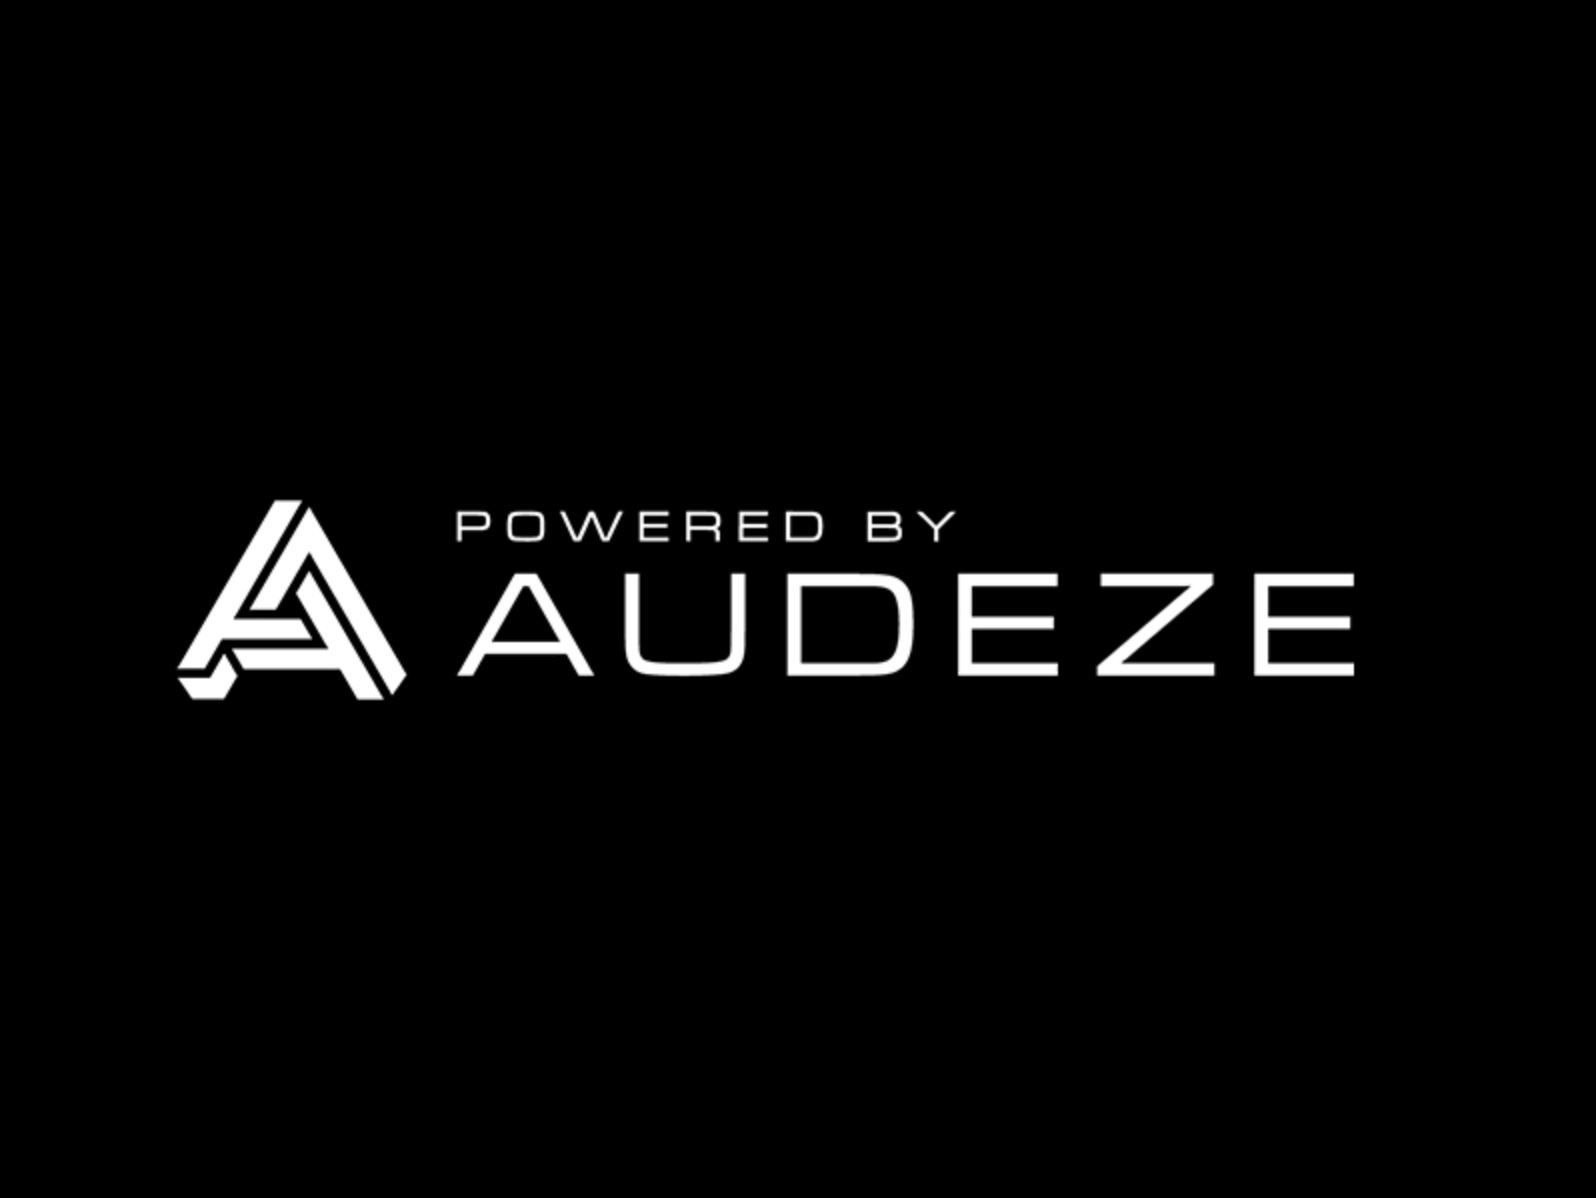 powered by AUDEZE